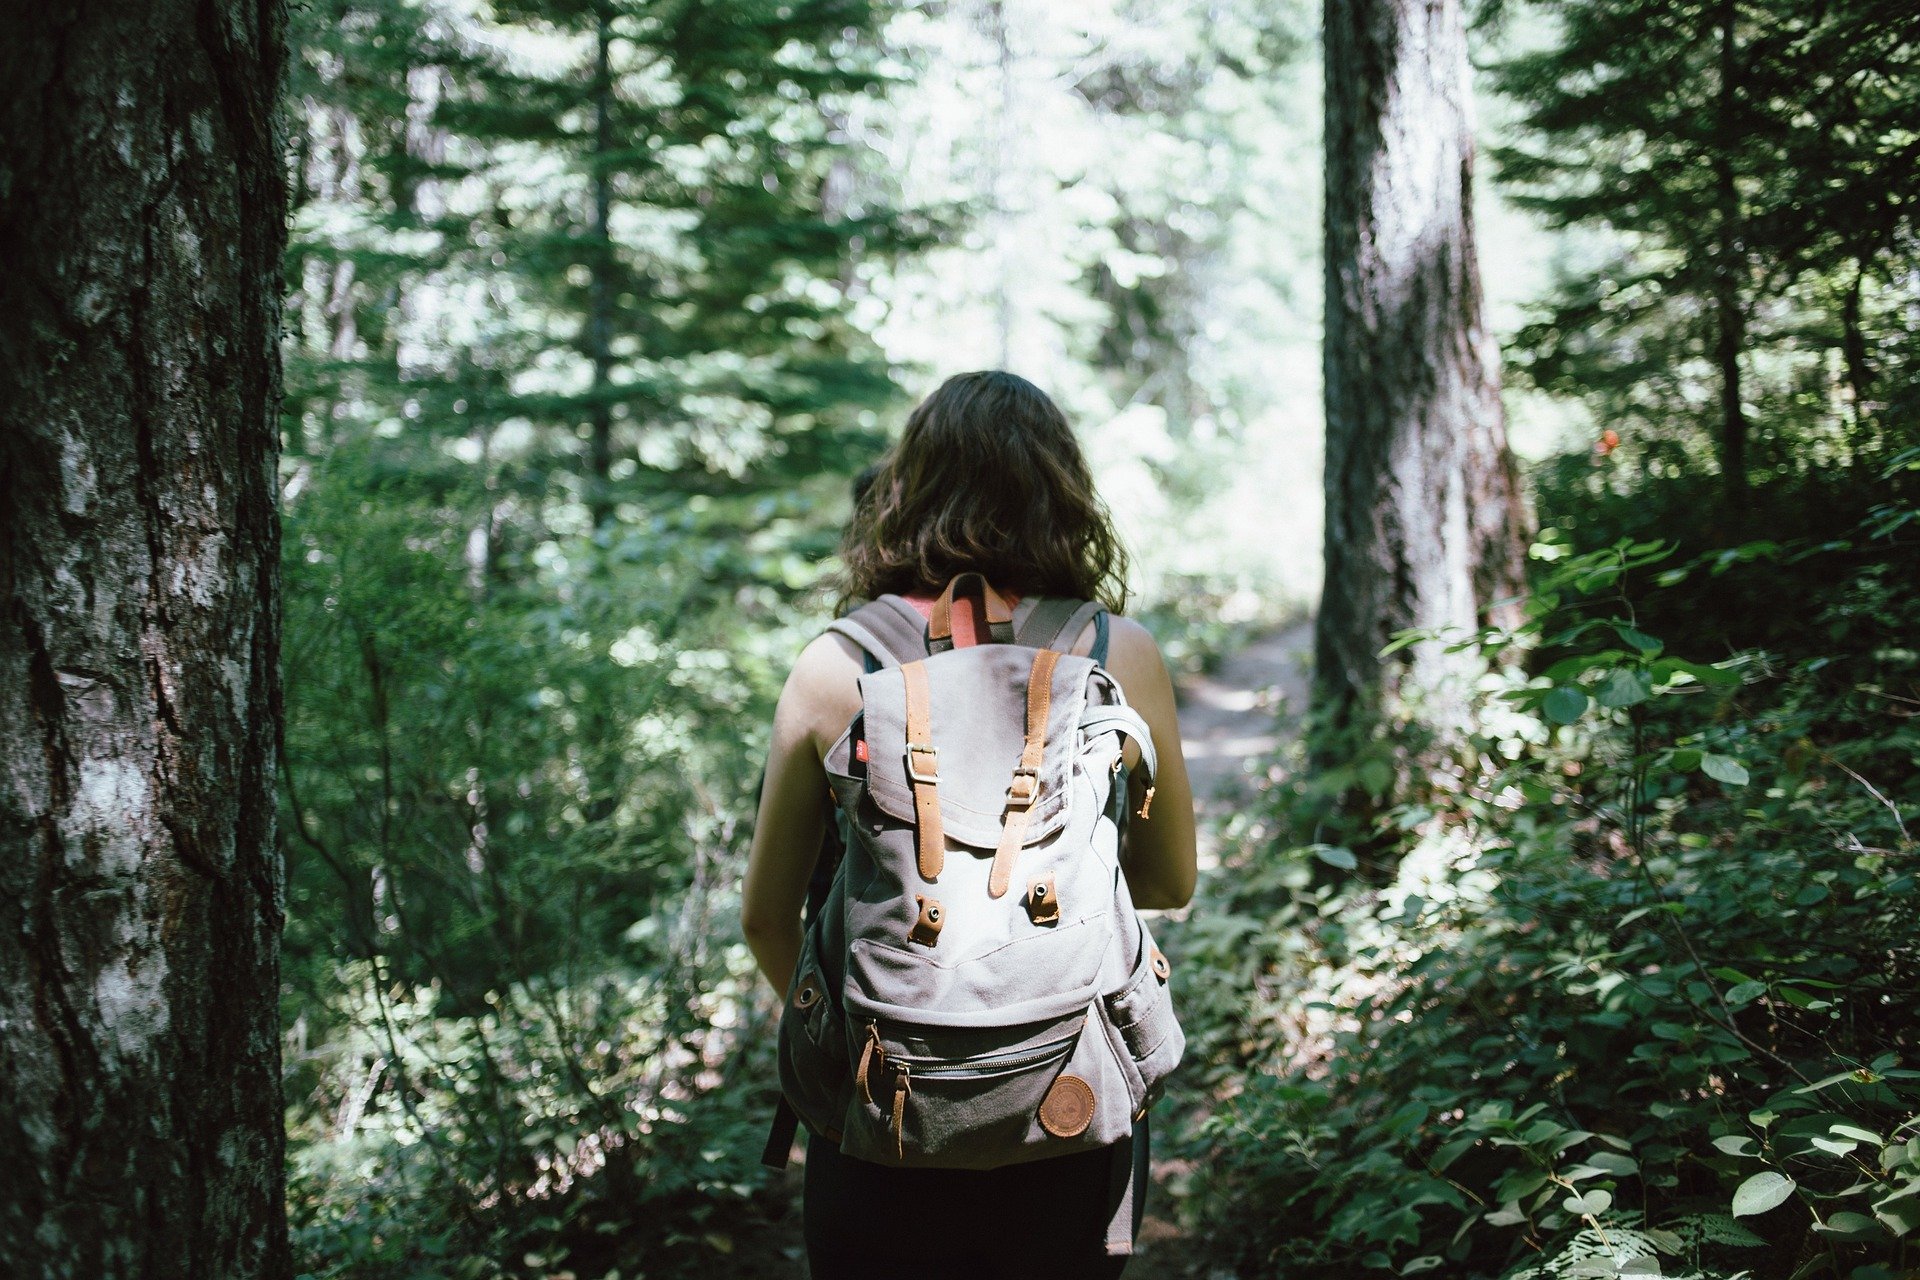 Pictured - A woman carrying a gray backpack walking in the woods | Source: Pixabay 